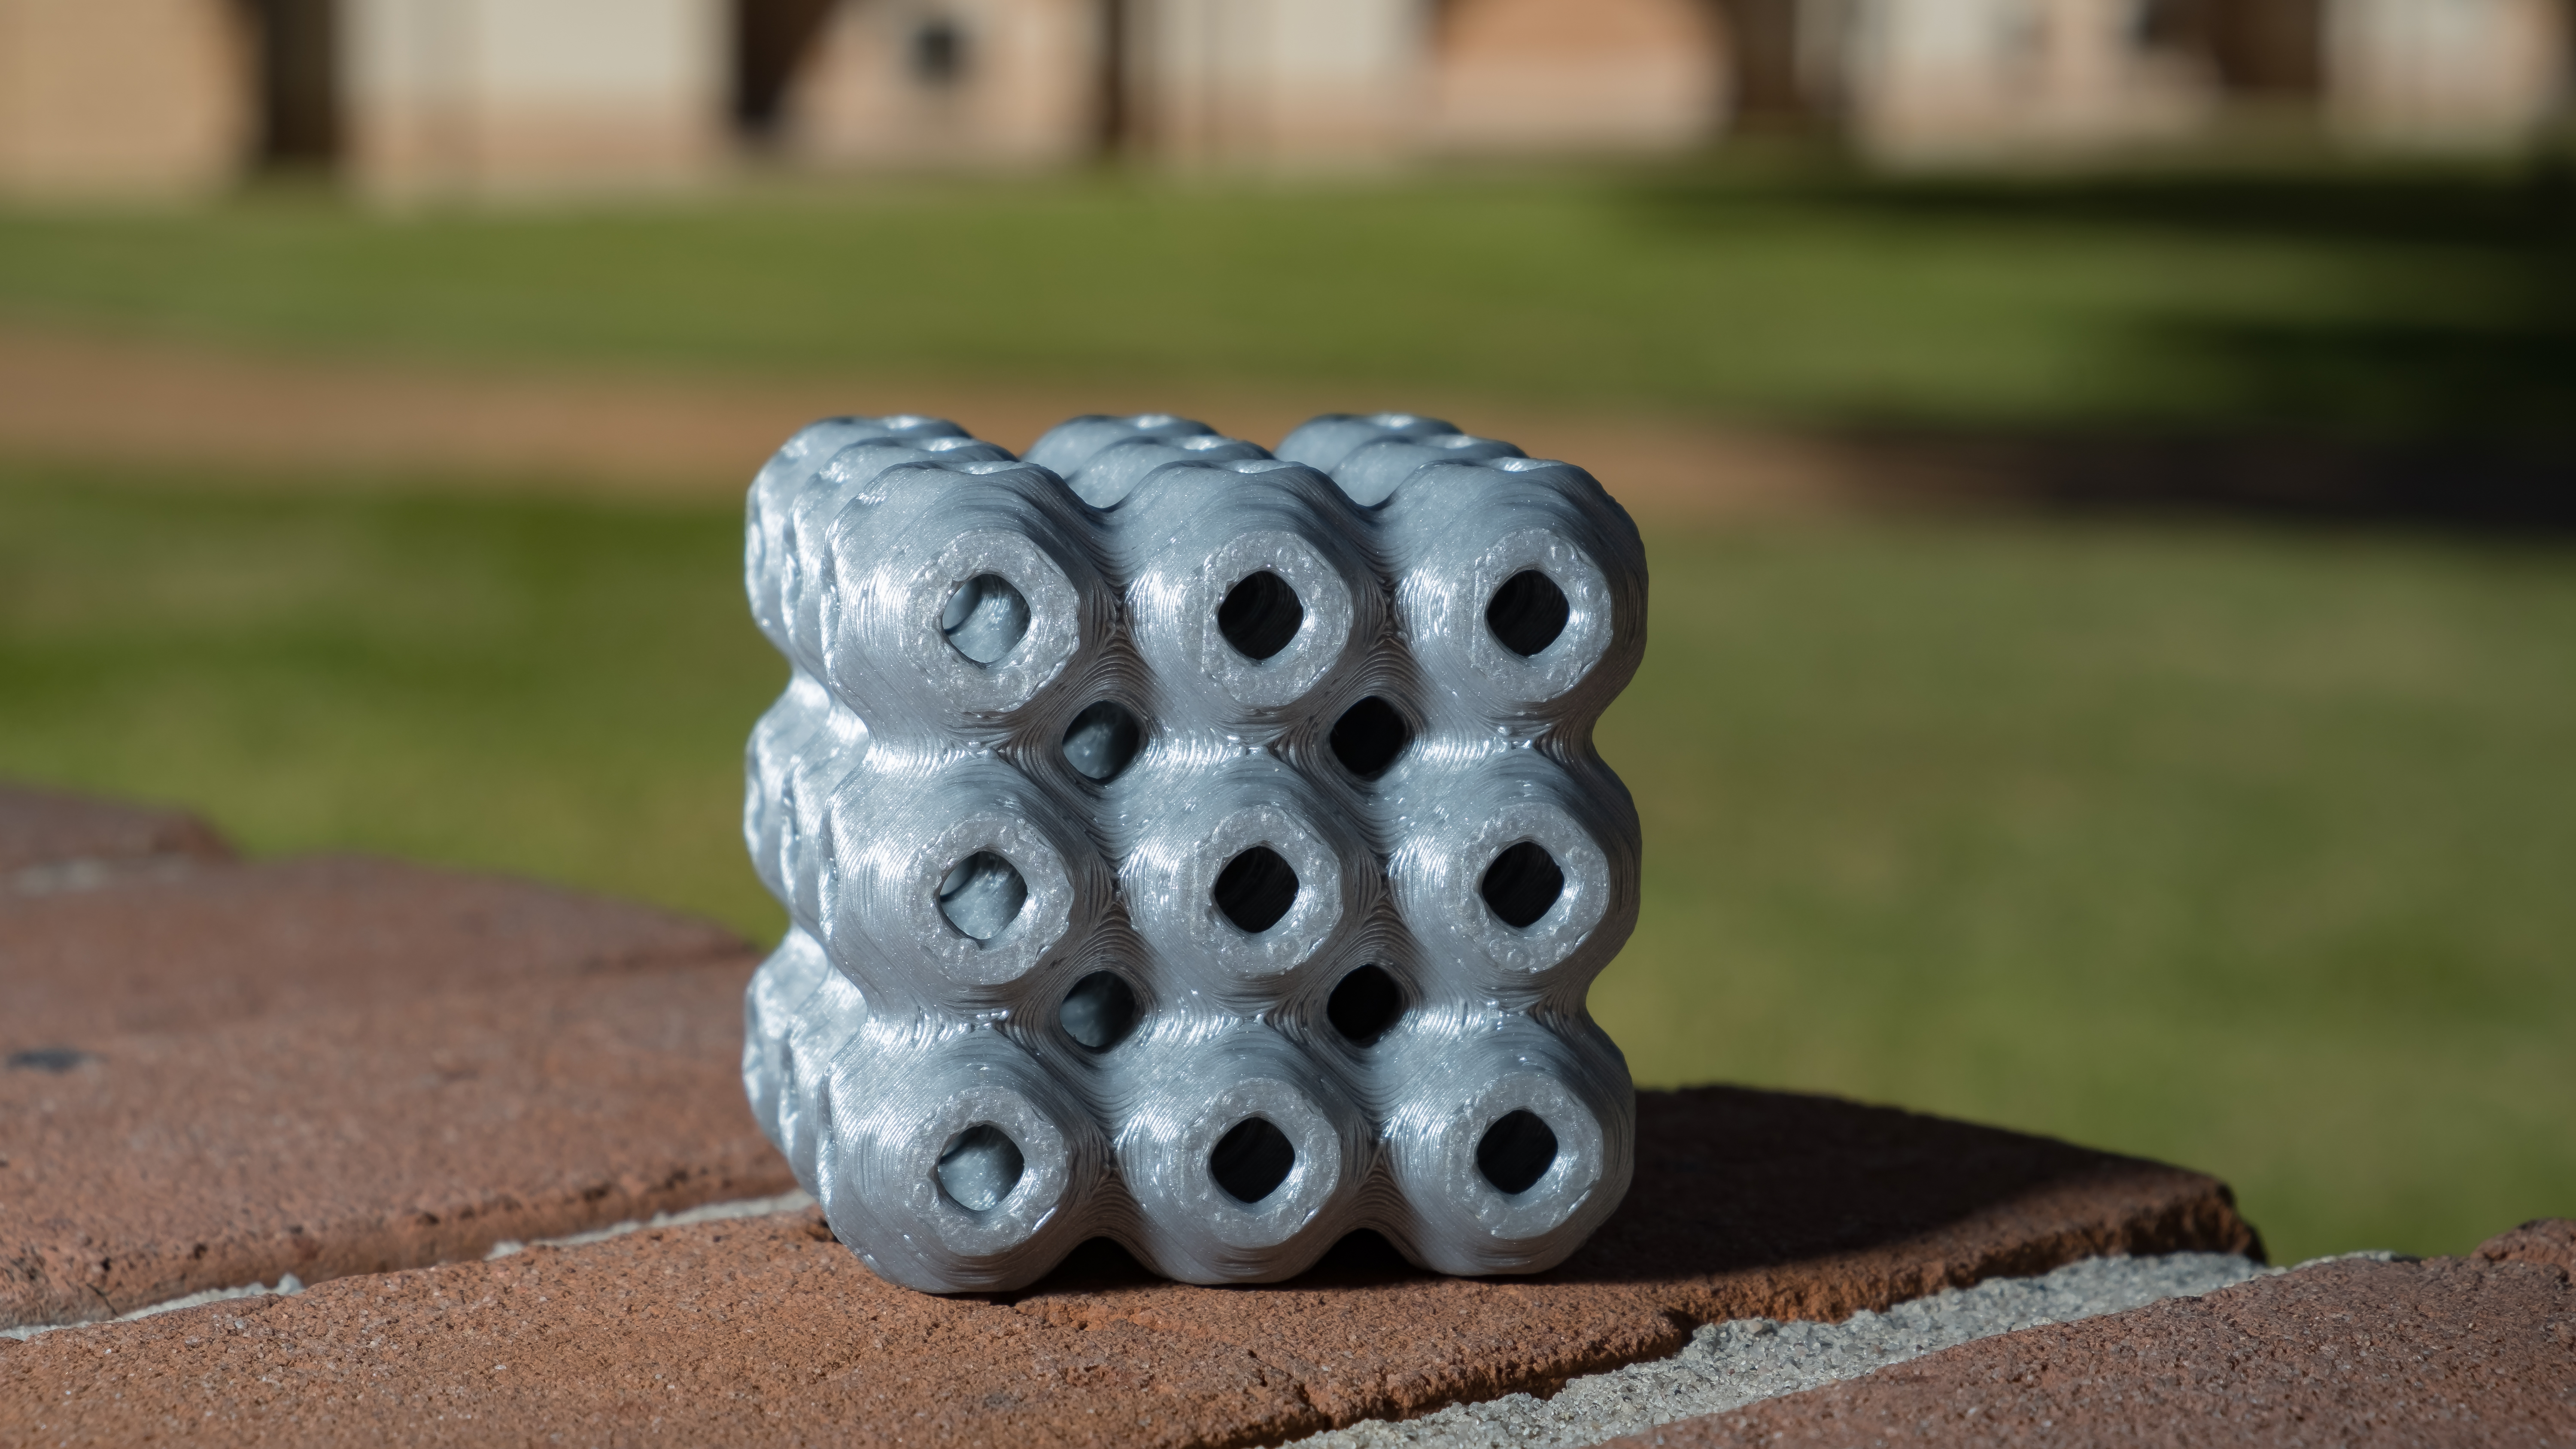 A schwarzite created on a 3D printer by materials scientists at Rice University. The curved surface repeats throughout the structure, which showed excellent strength and deformation characteristics in tests at Rice. Photo: Jeff Fitlow/Rice University.